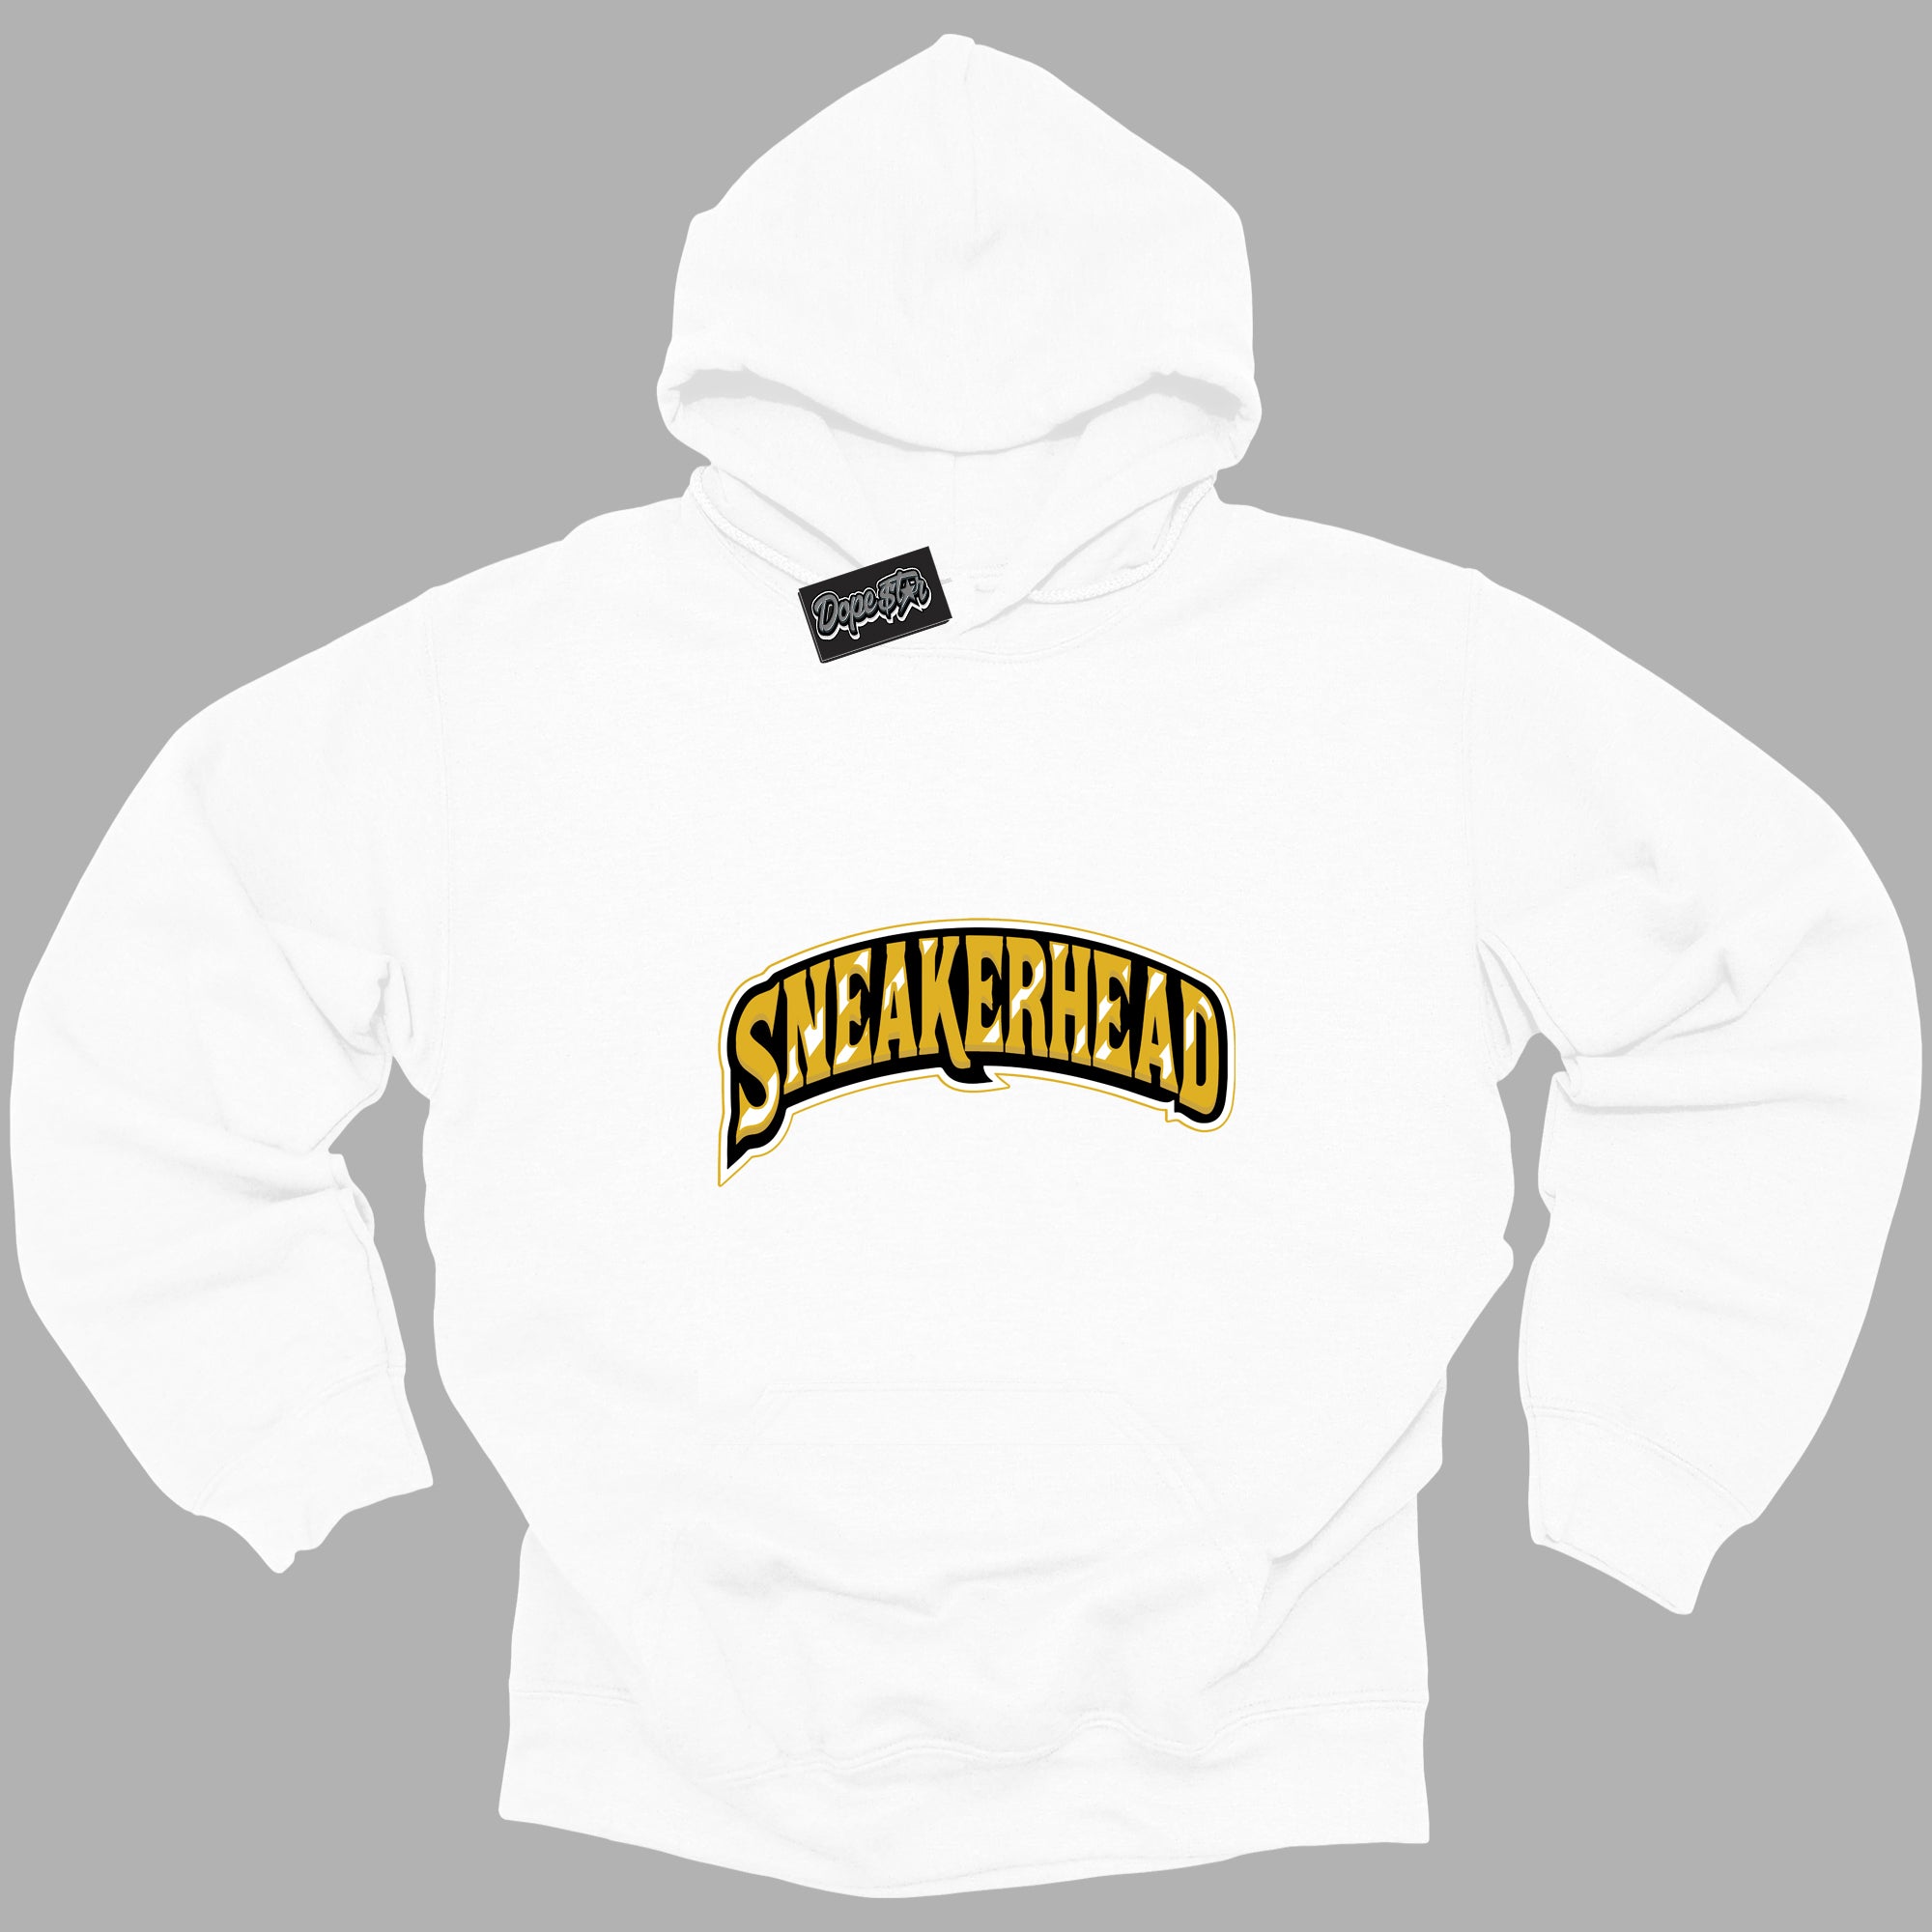 Cool White Hoodie with “ Sneakerhead ”  design that Perfectly Matches Yellow Ochre 6s Sneakers.